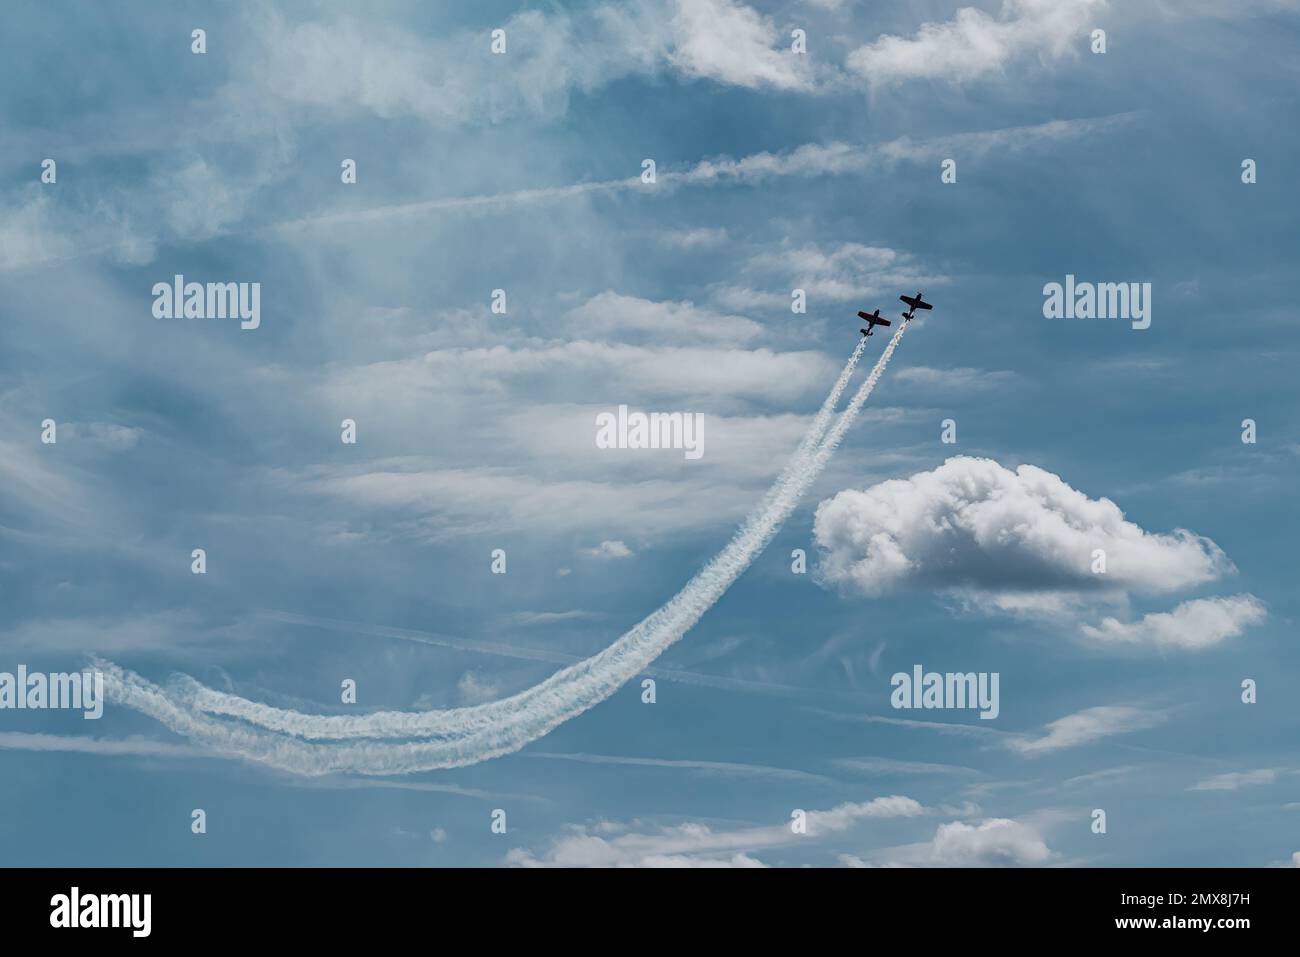 two small planes fly parallel in upward trajectory near a cloud over blue sky. condensation trails and clouds. concept of friendship and loyalty. Mutu Stock Photo